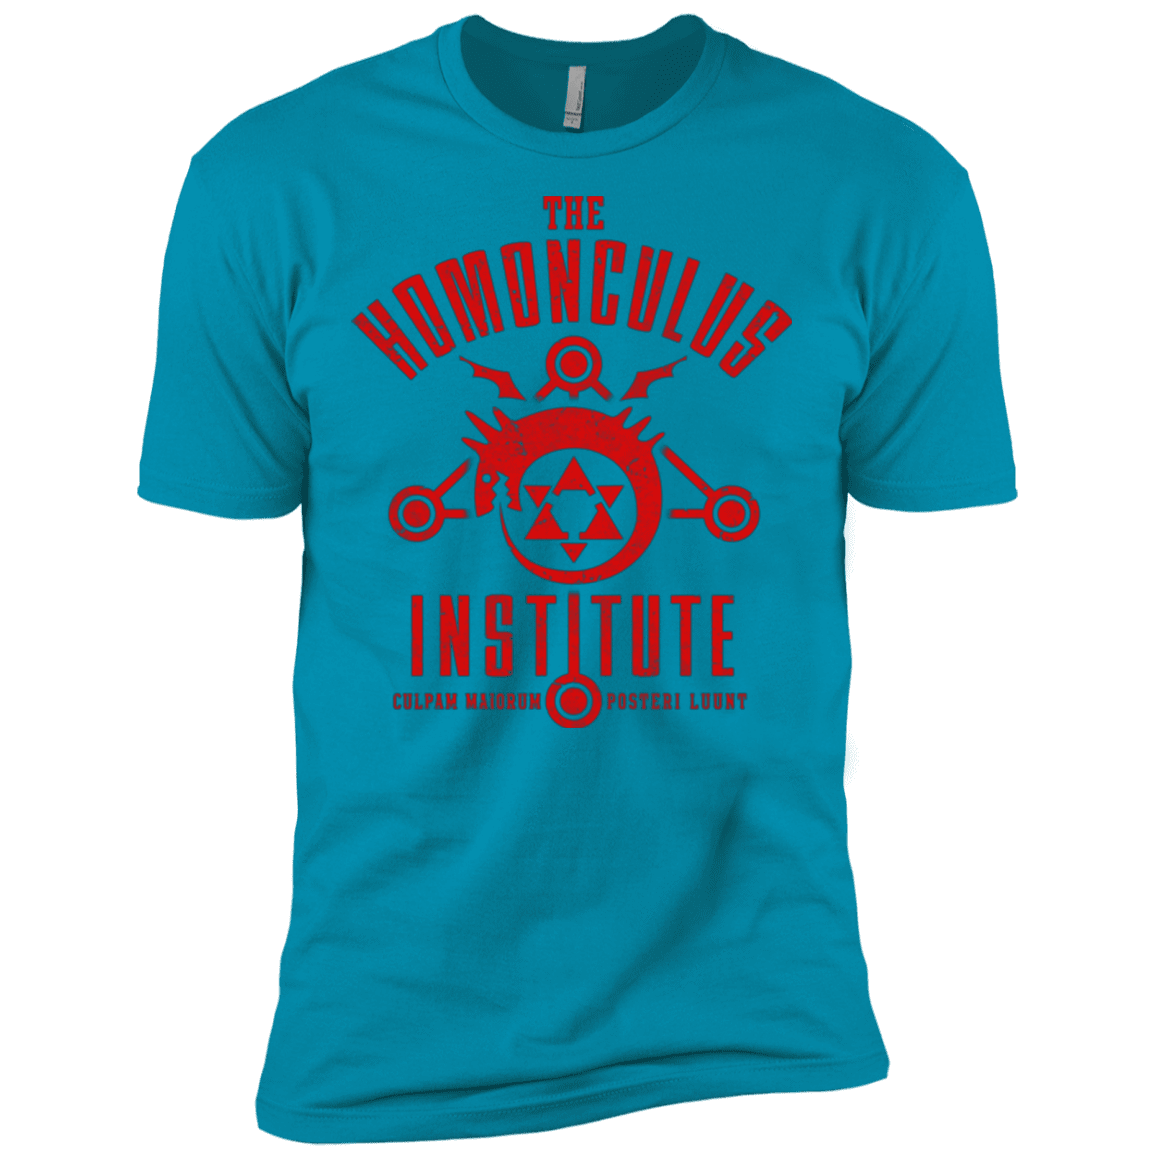 T-Shirts Turquoise / X-Small The Sins of the Father Men's Premium T-Shirt